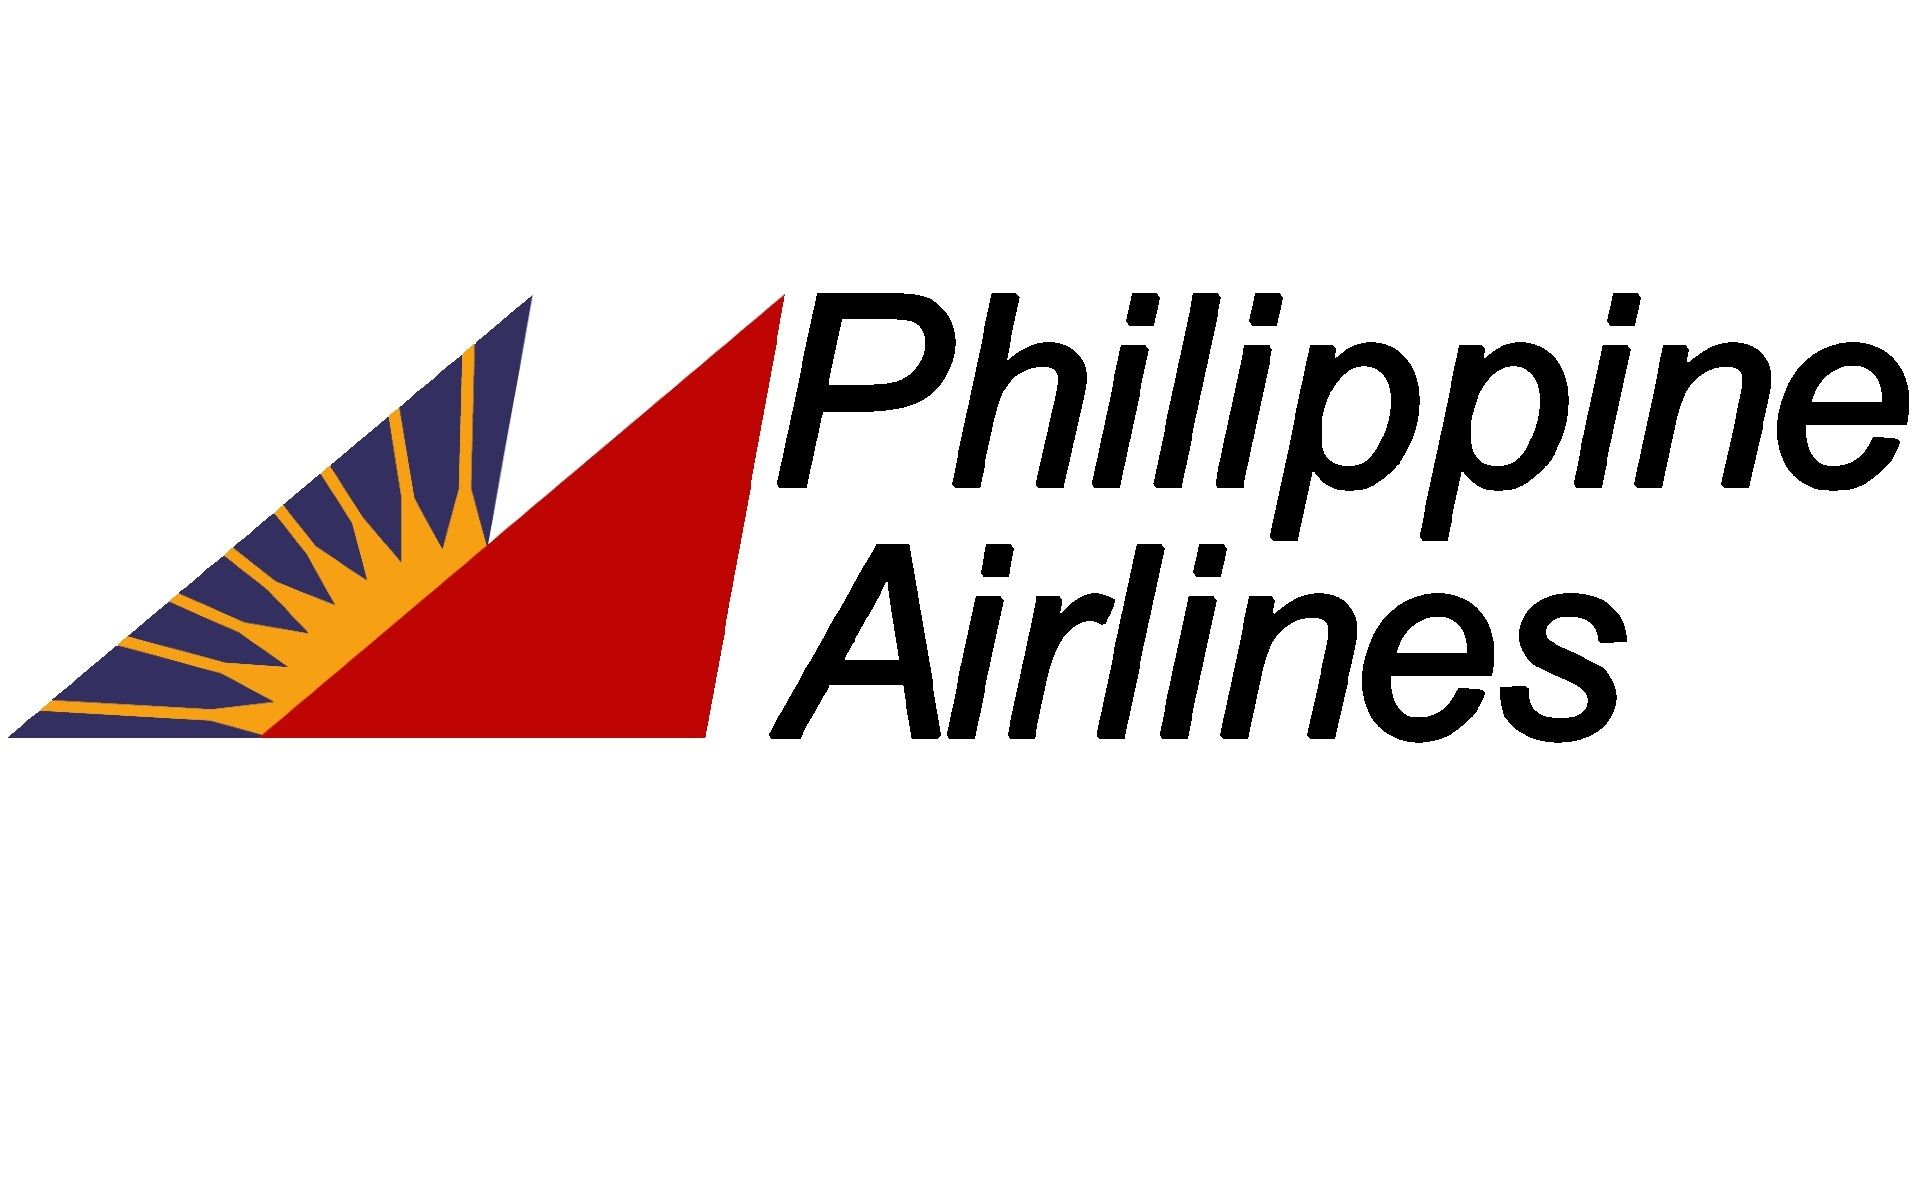 Philippine Airlines logo wallpaper download. Wallpaper, picture, photo